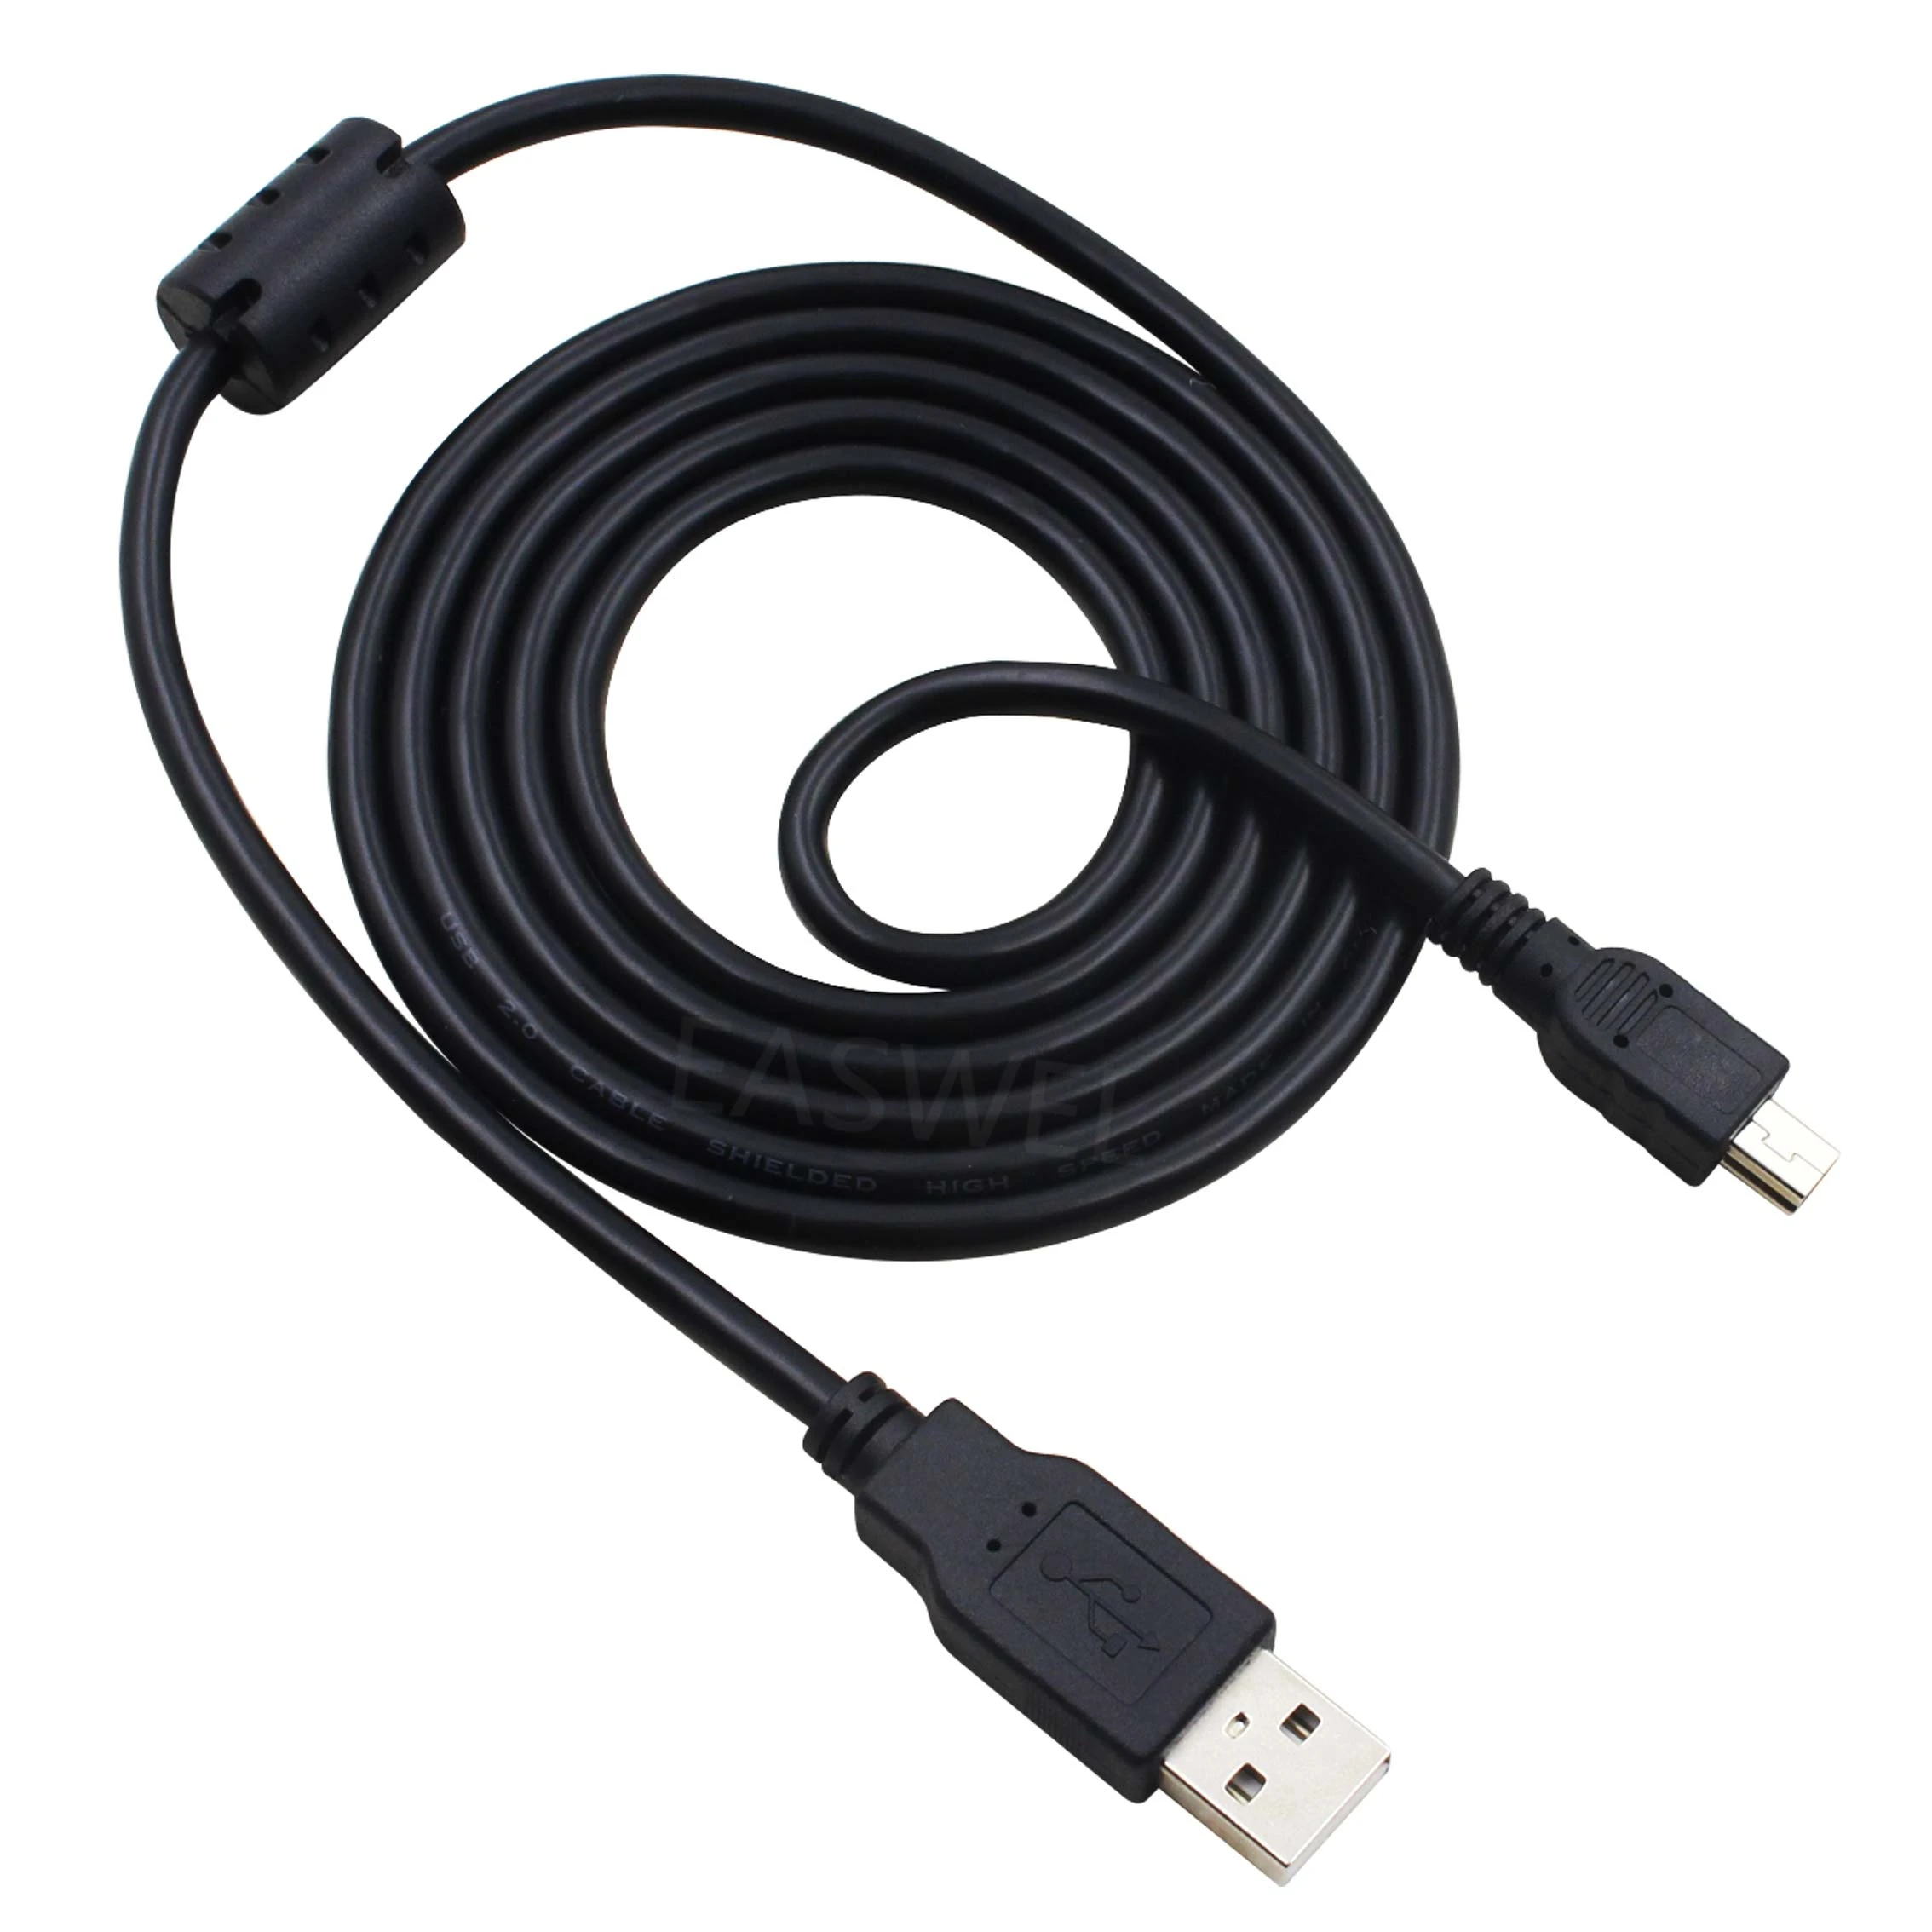 USB Data Sync Cable Cord For Sony ICD PX470 IC DPX470 ICD PX470F Voice  Recorder|Data Cables| - AliExpress